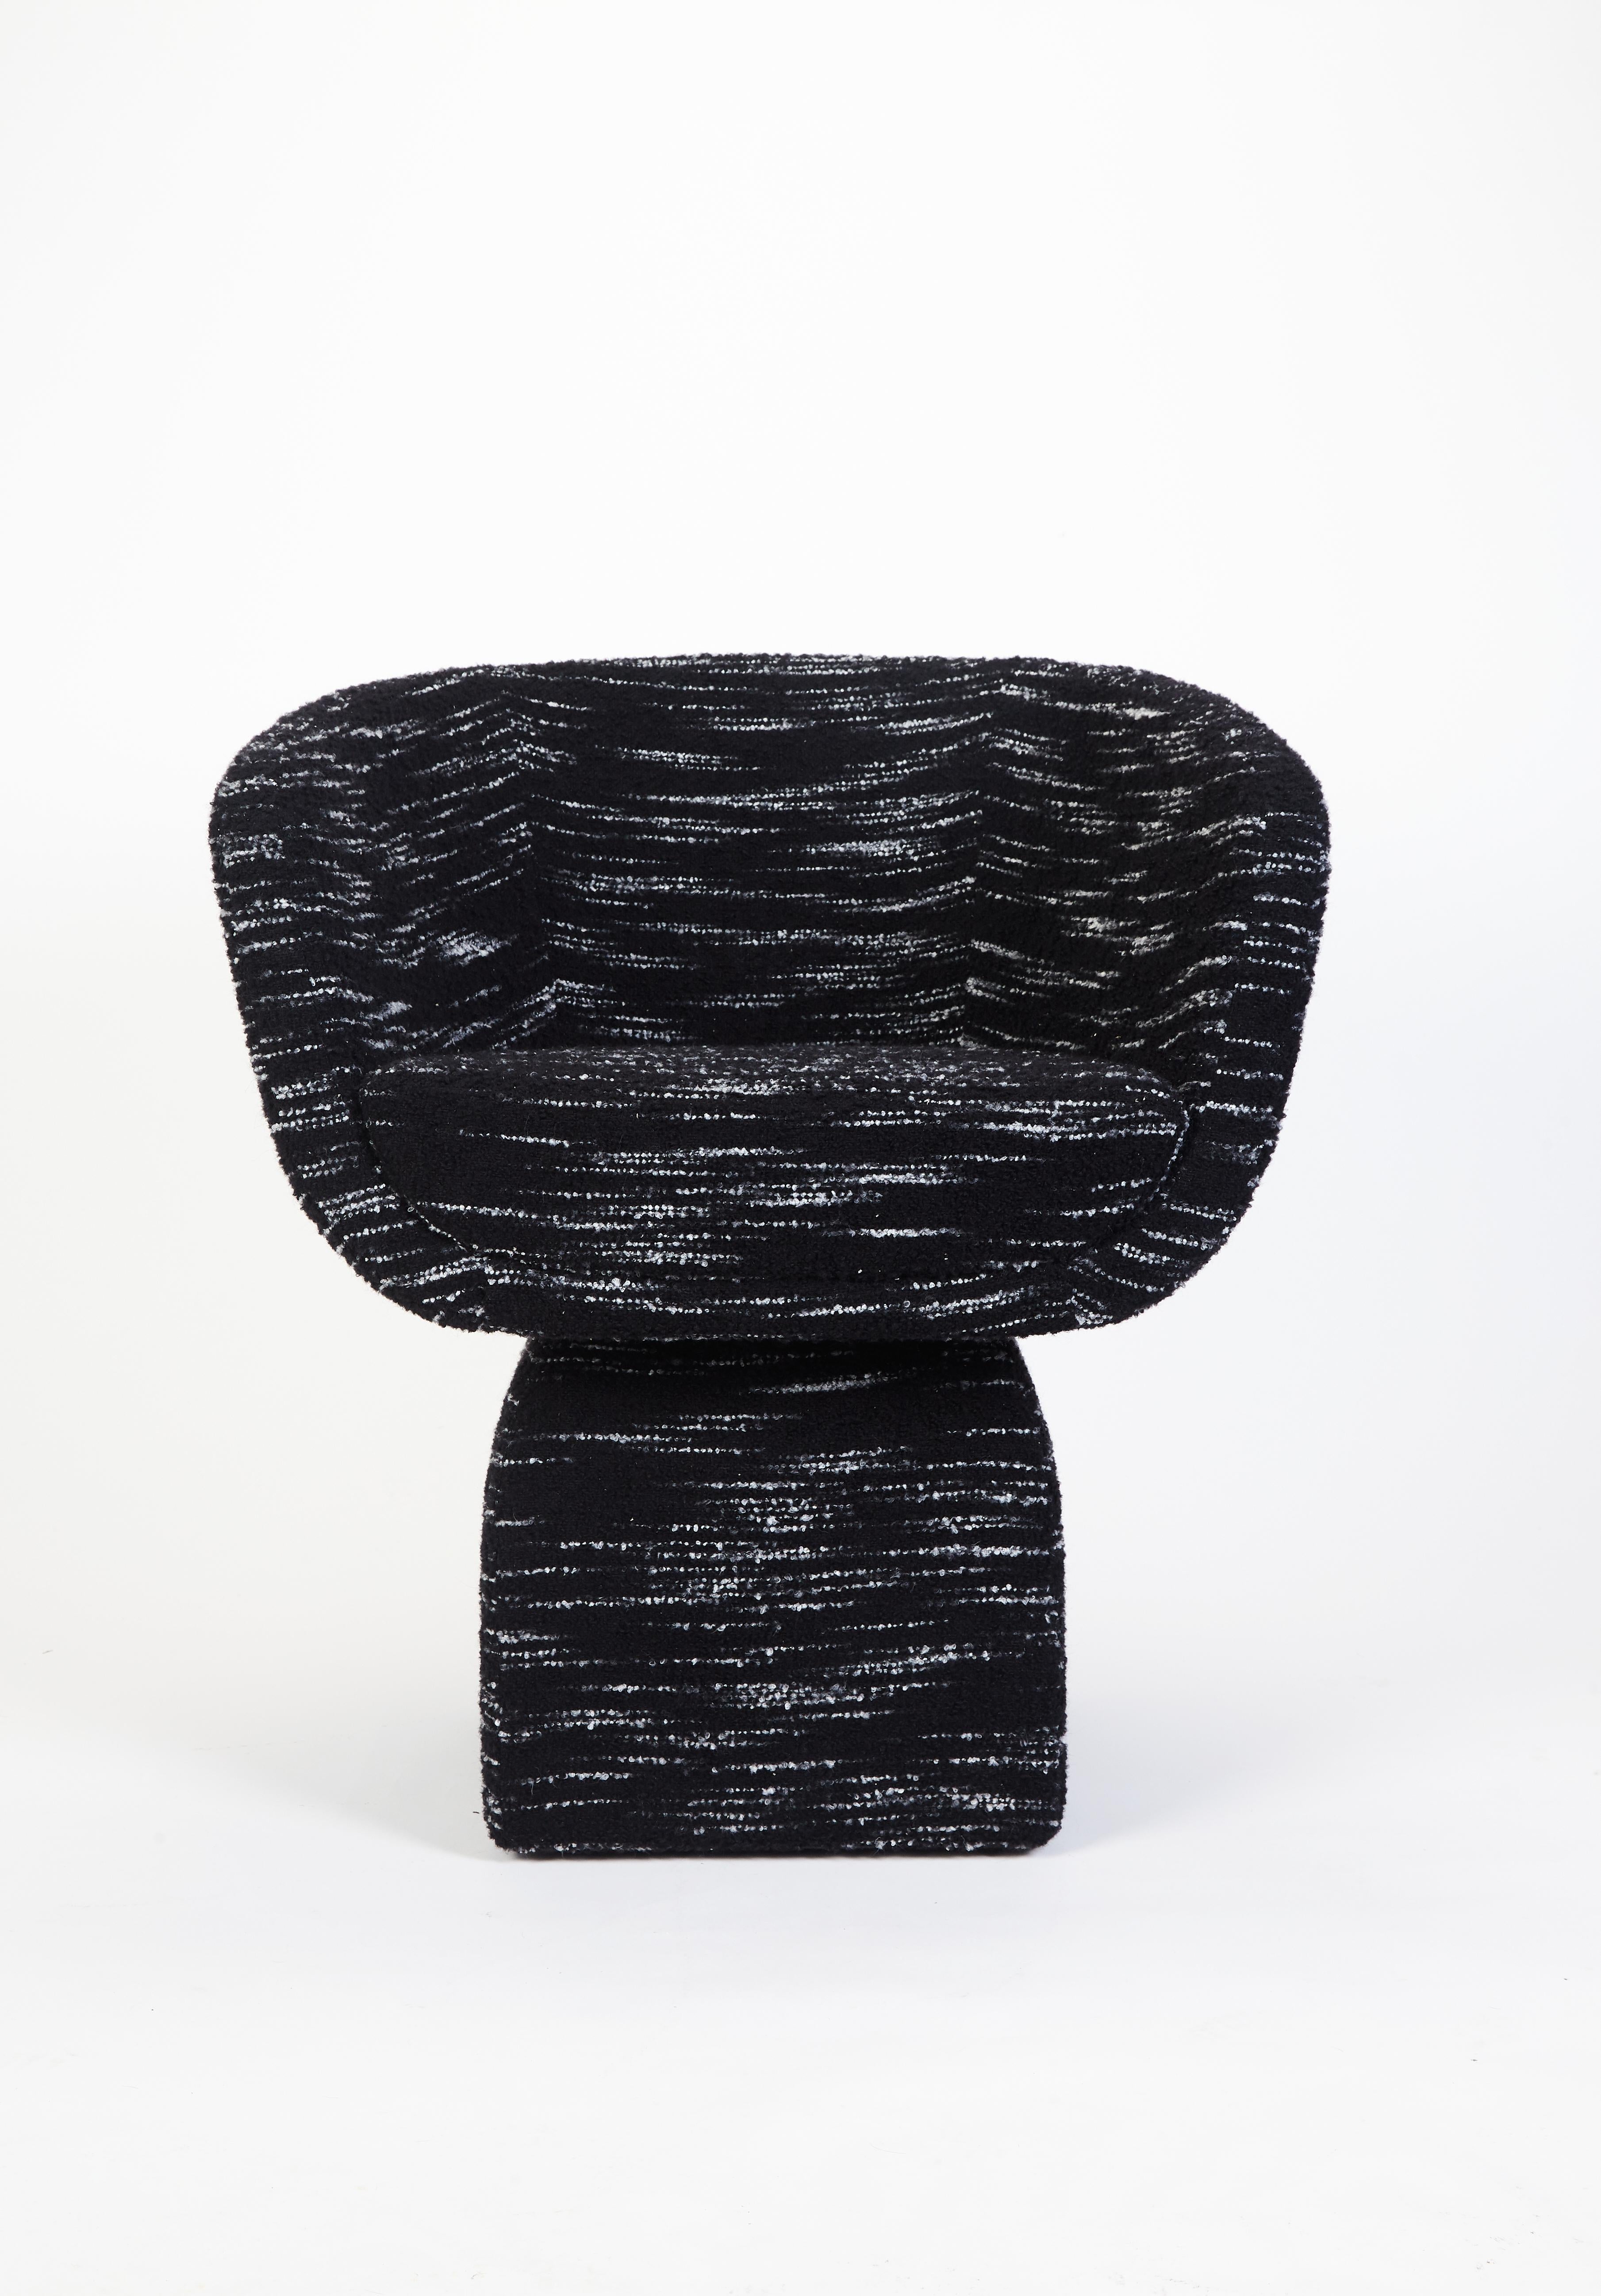 Boucle Oscar Chair by DUISTT 
Dimensions: W 65 x D 58 x H 77 cm
Materials: Special Boucle Fabric Nobilis SF.DE.21.005
Swivel version available upon request. Please contact us.

Inspired by the curved lines poetry of Oscar Niemeyer’s architecture,